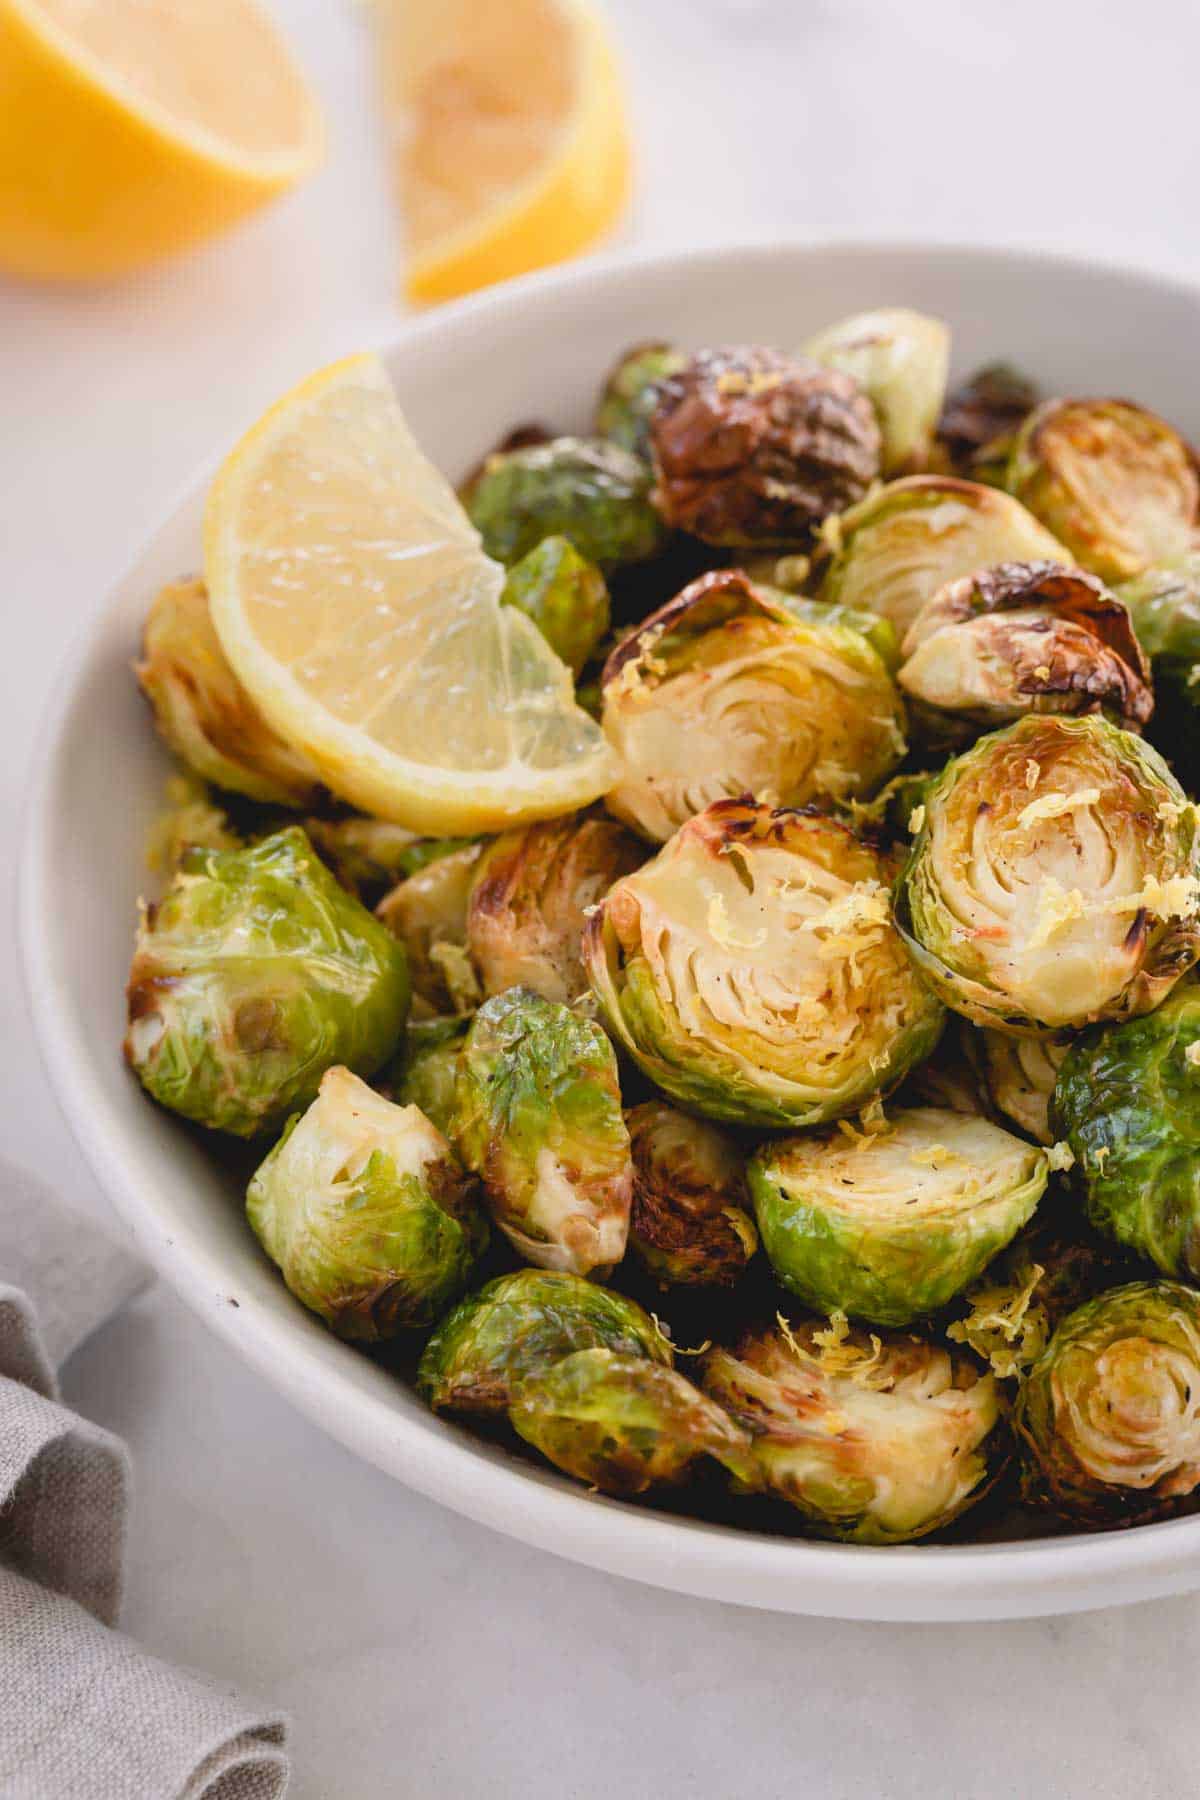 A bowl of roasted lemon brussels sprouts.